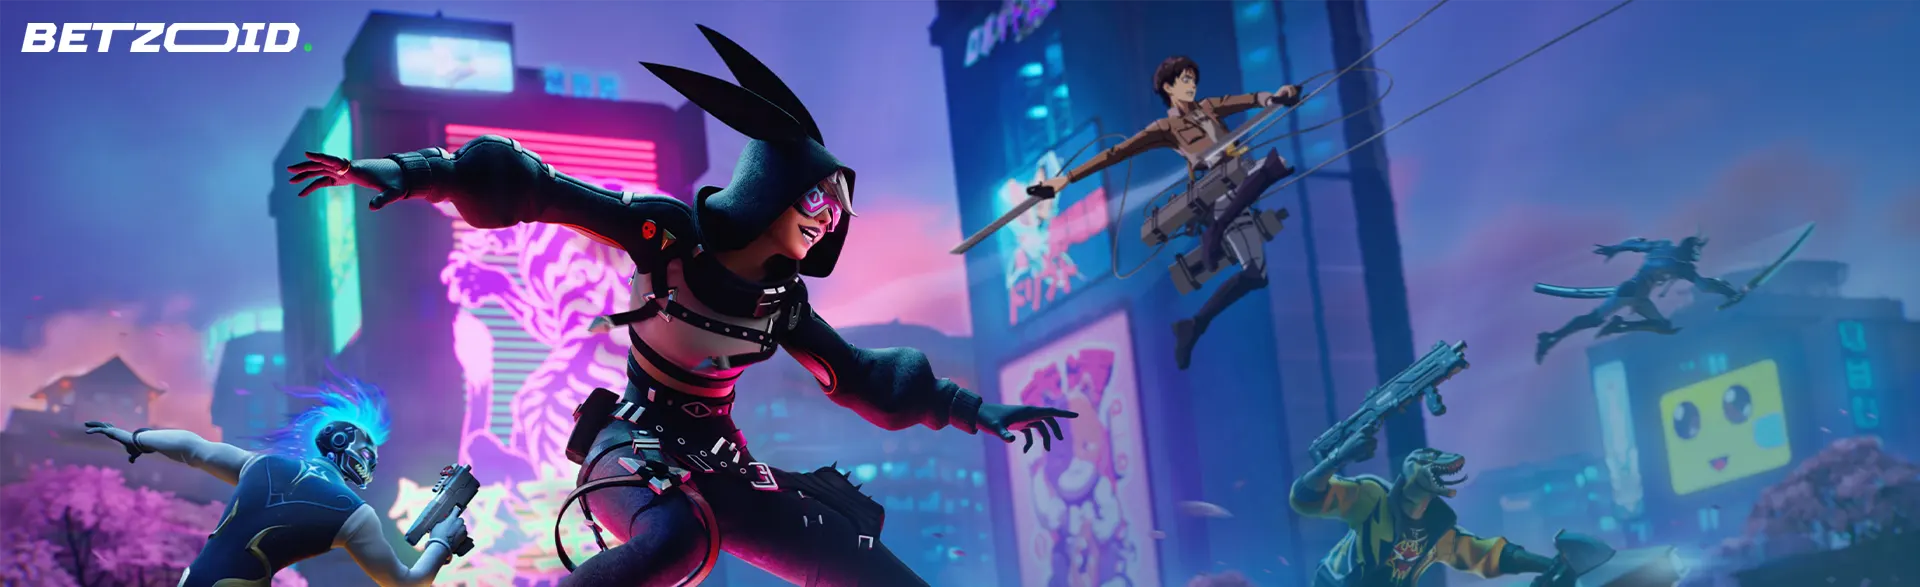 Animated characters in battle on esports bookmakers’ platforms.